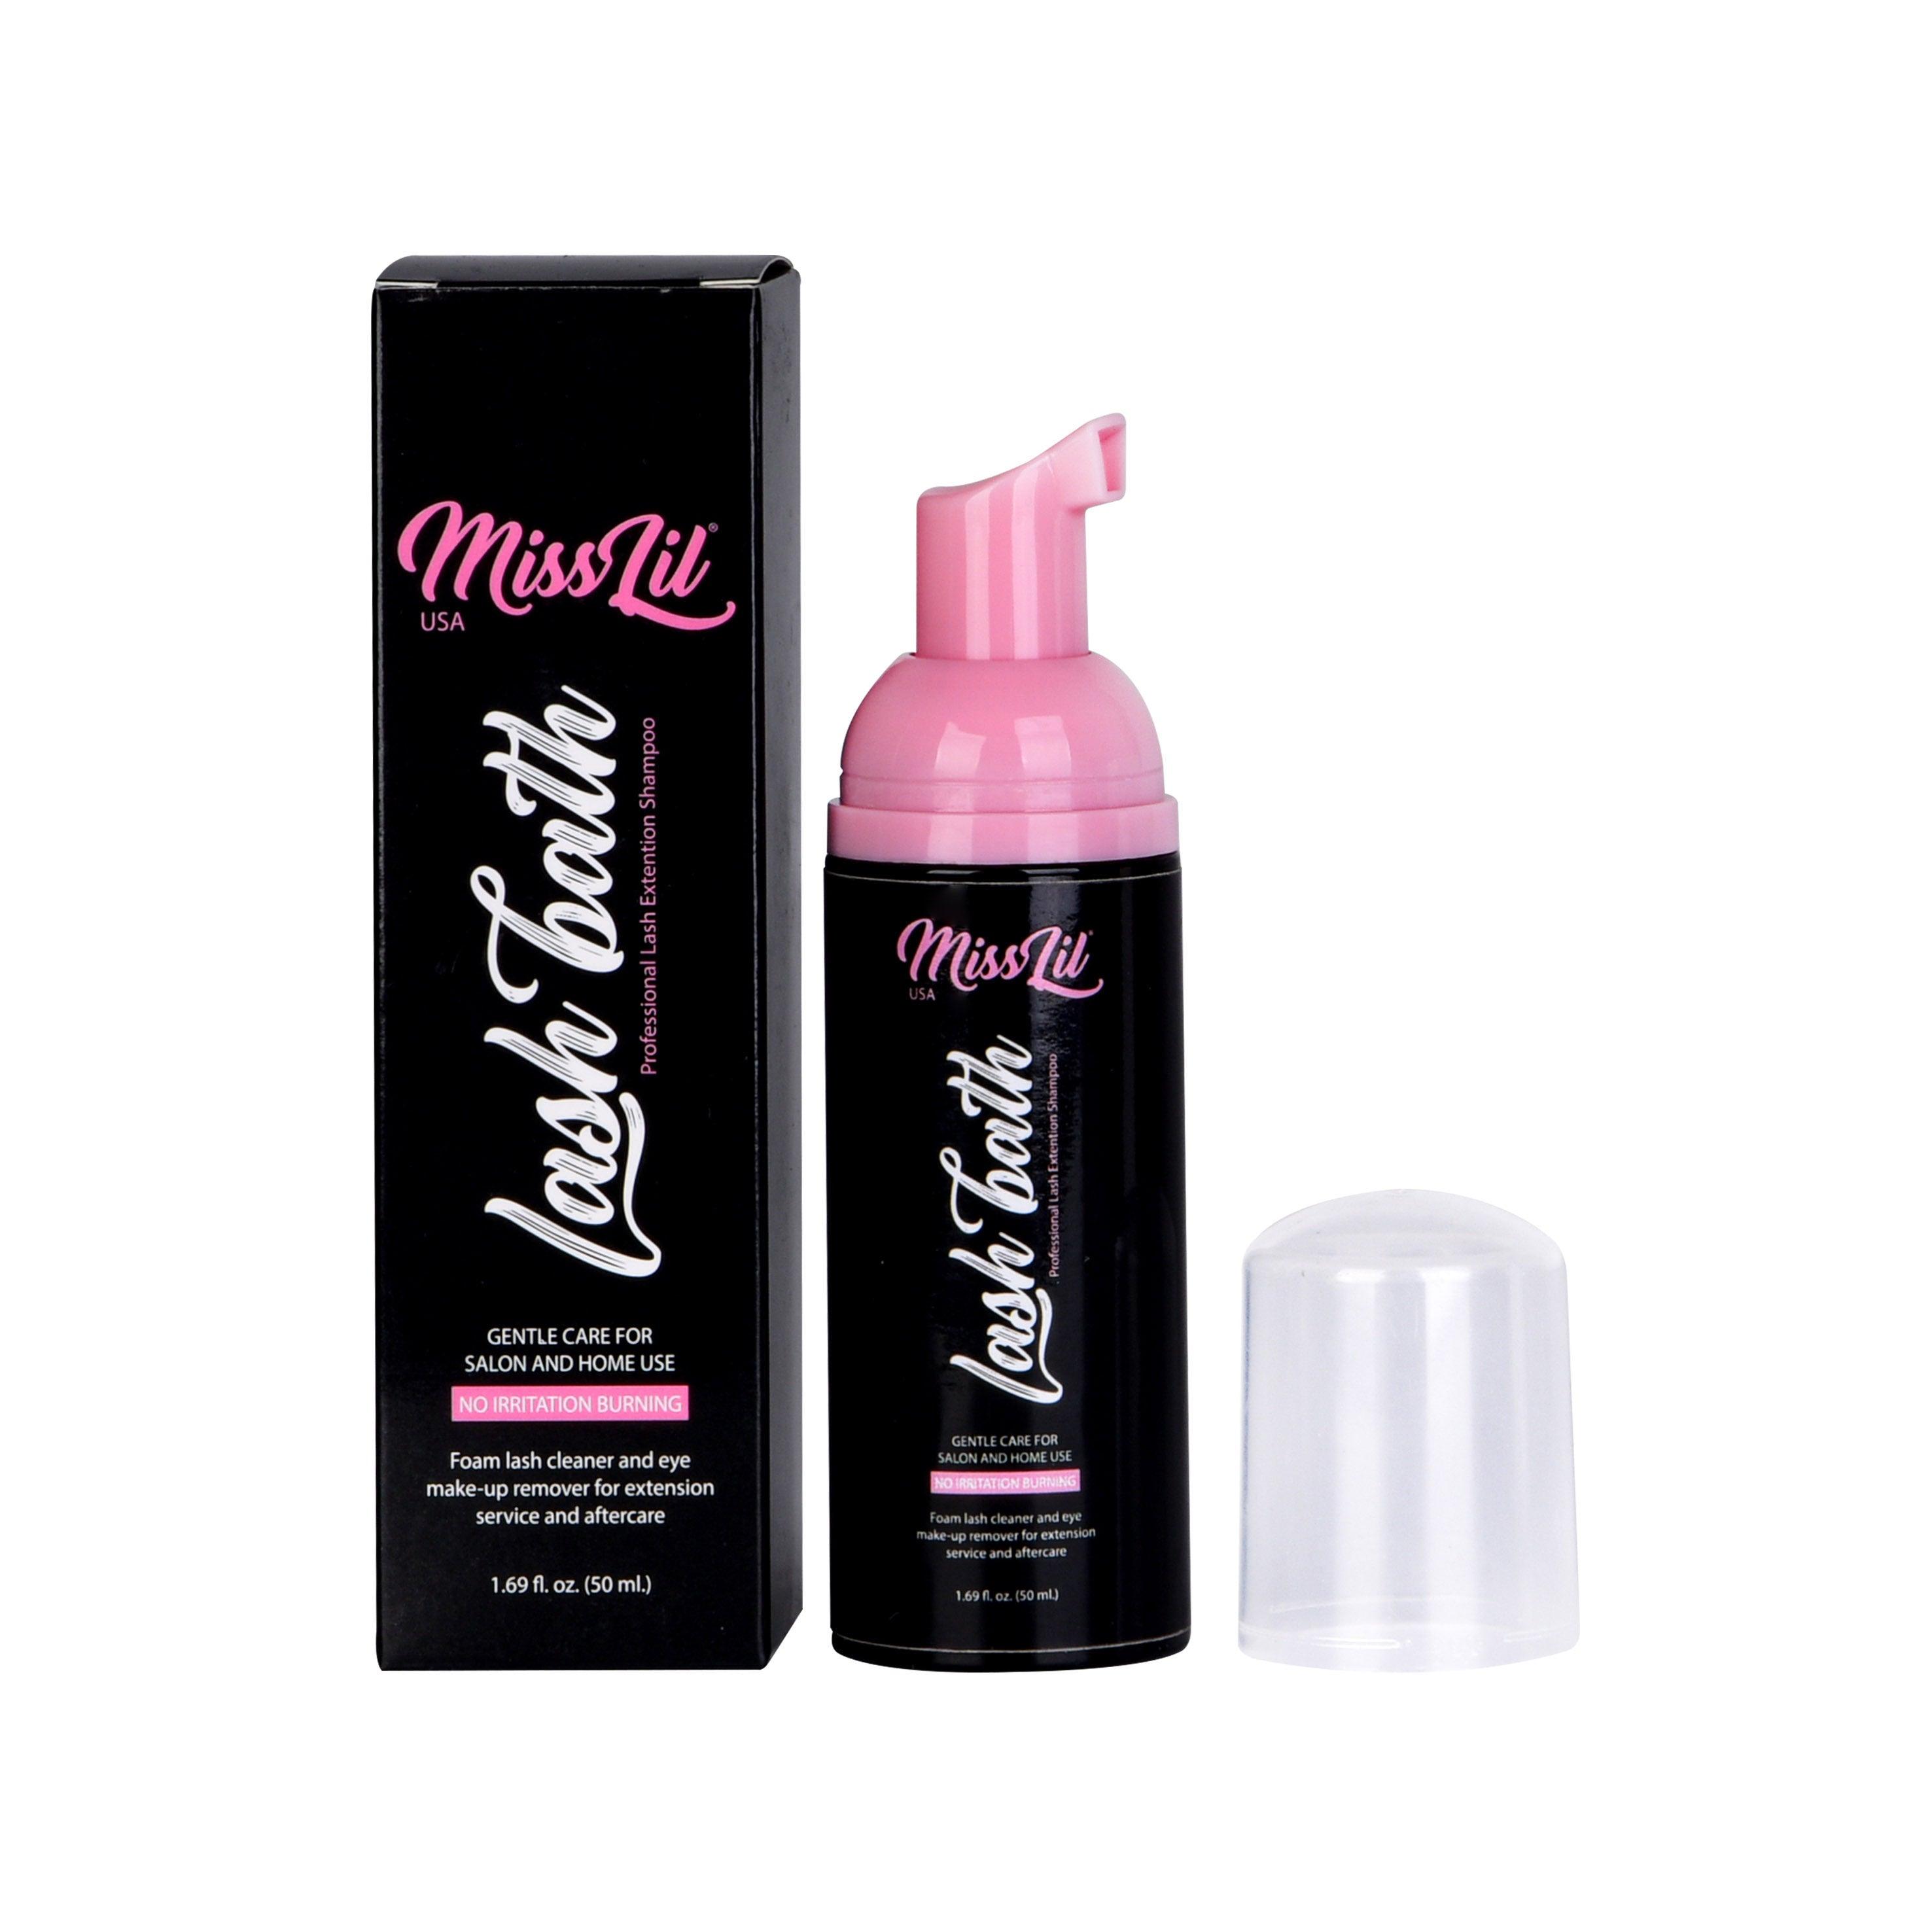 Foam lash cleaner and eye make-up remover for extension service and aftercare - Miss Lil USA